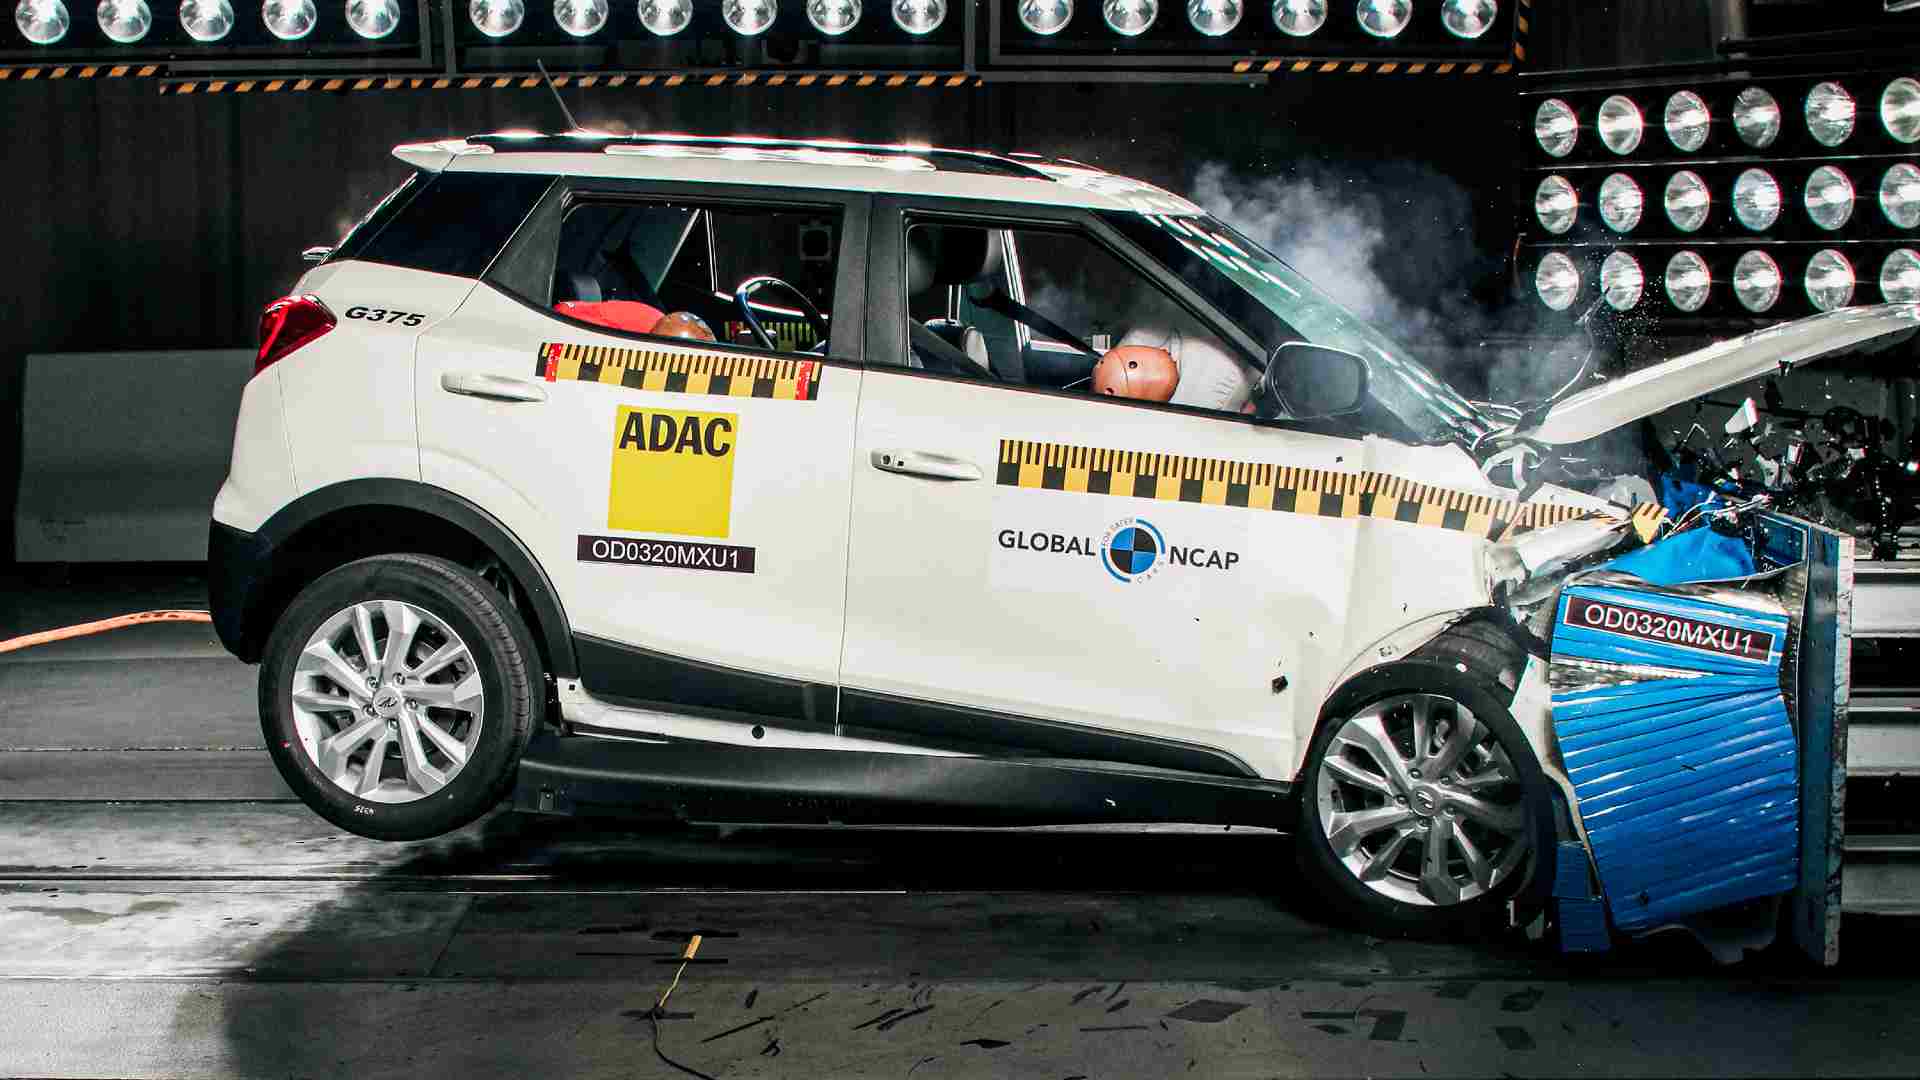 The Mahindra XUV300 has registered the highest adult occupant protection score for any made-in-India model tested by Global NCAP till date. Image: Global NCAP